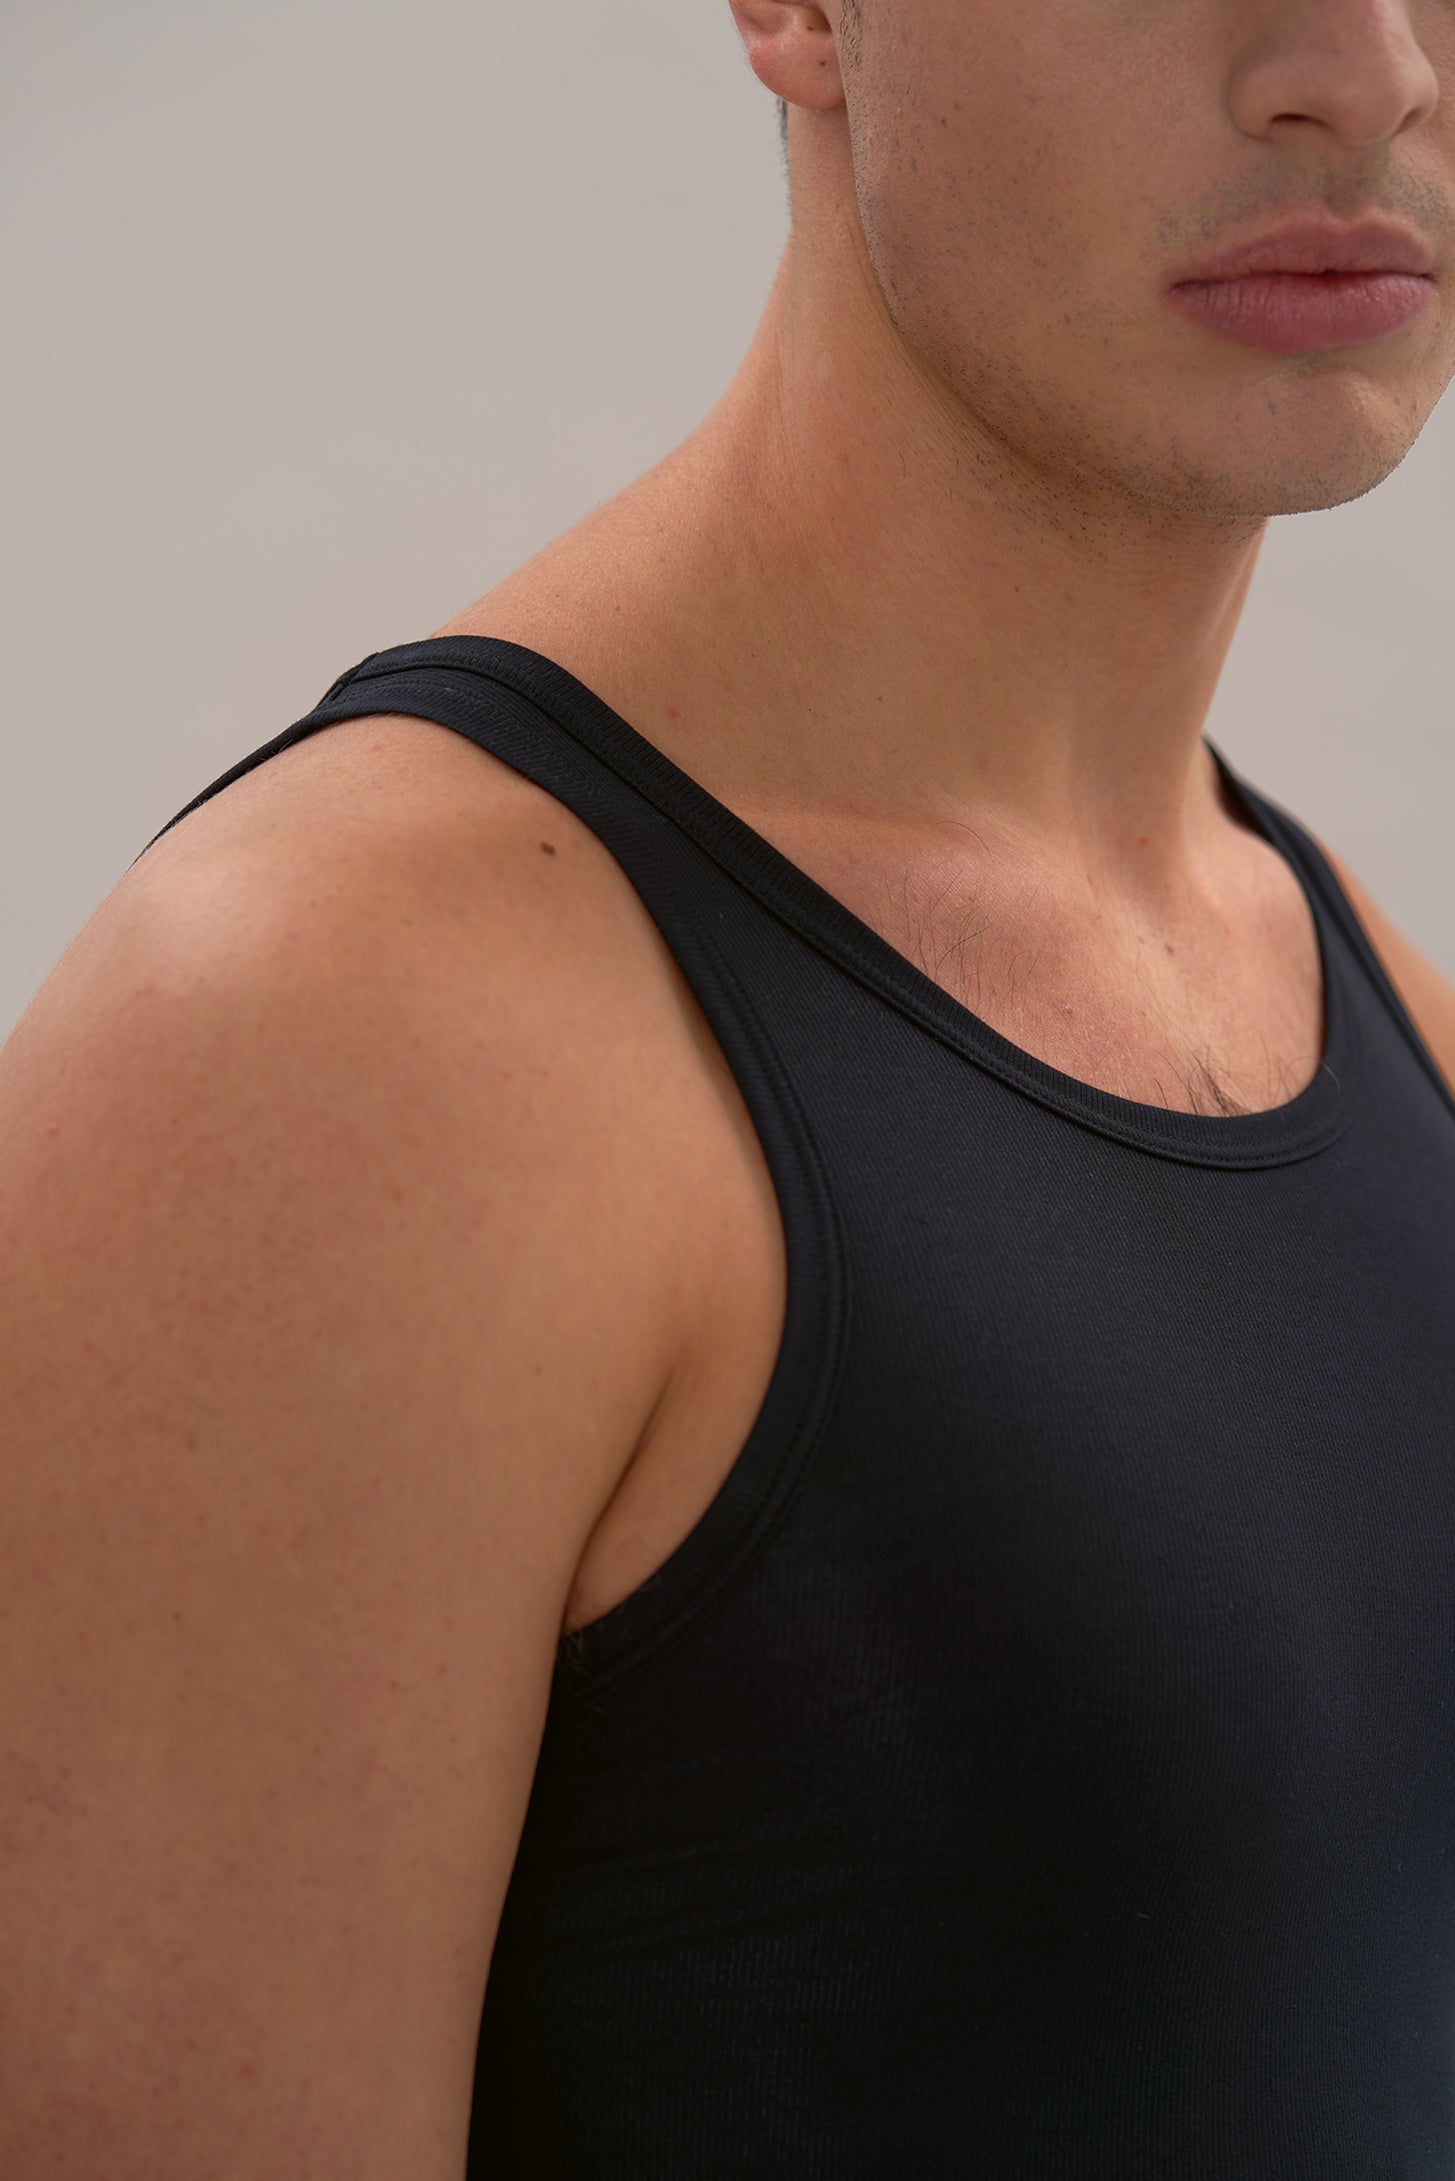 Tank top / undershirt in black made from natural MicroModal from moi-basics